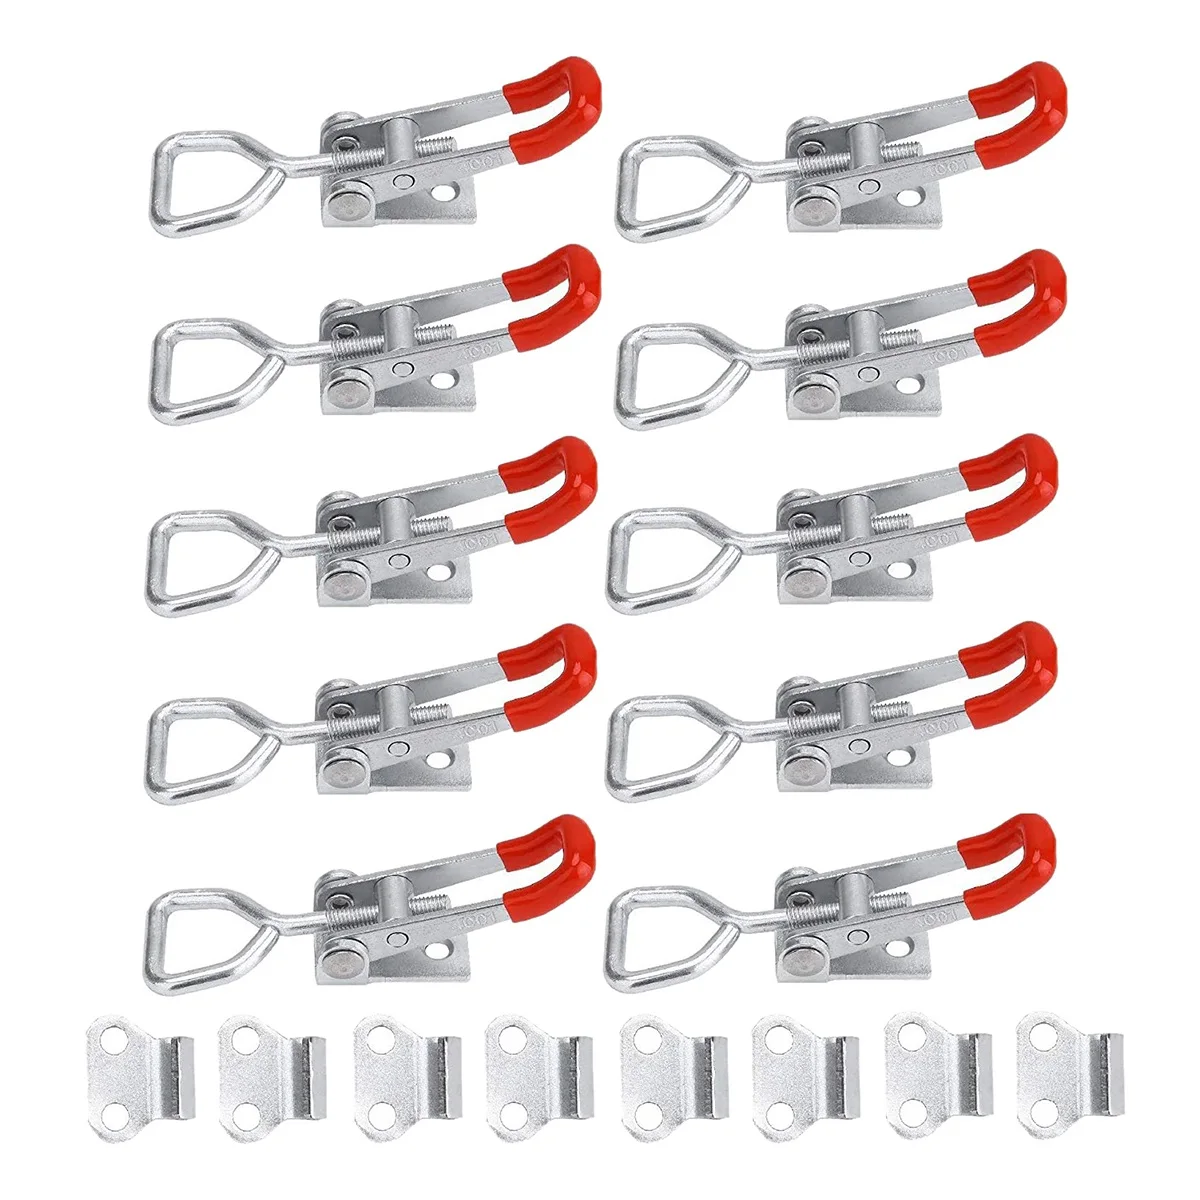 

10 Pack Adjustable Toggle Latch Clamp 150Kg Holding Capacity, 4001 Heavy Duty Quick Release Pull Latch Toggle Clamp